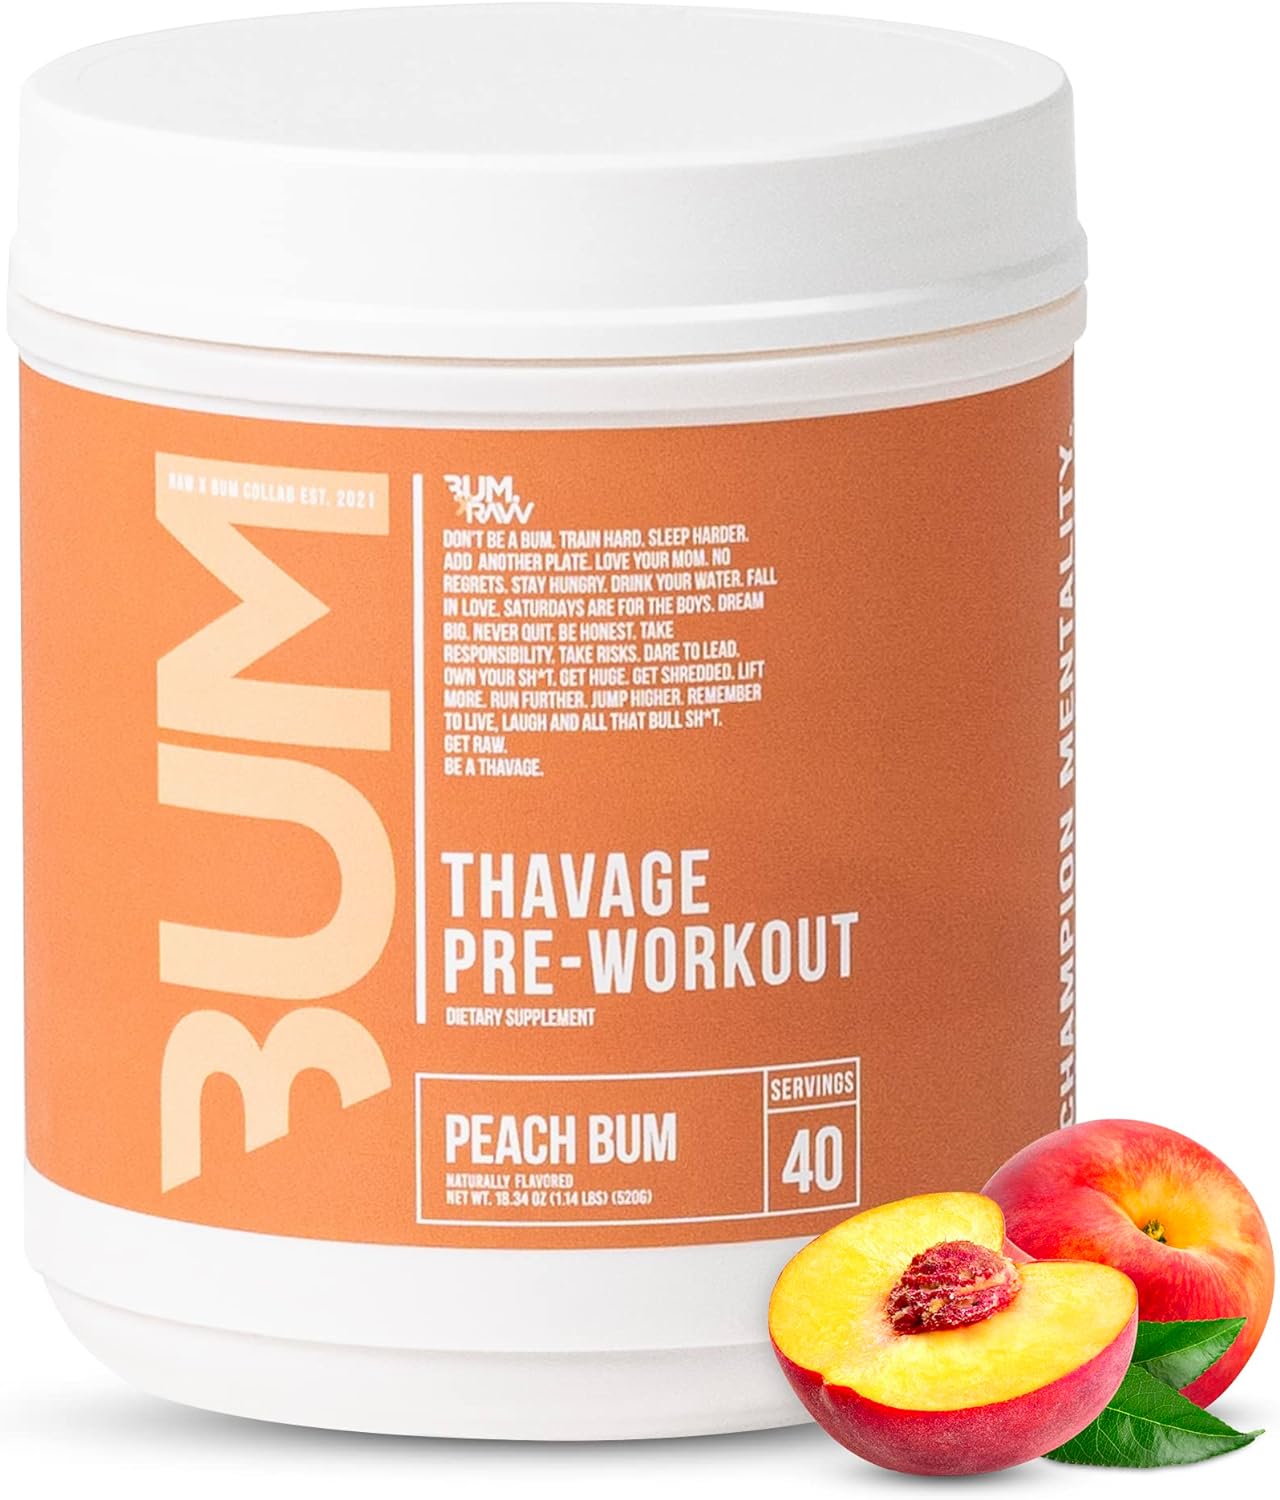 RAW Preworkout Powder, Thavage (Peach Bum) - Chris Bumstead Sports Nutrition Supplement for Men & Women - Cbum Pre Workout for Working Out, Hydration, Mental Focus & Energy - 40 Servings